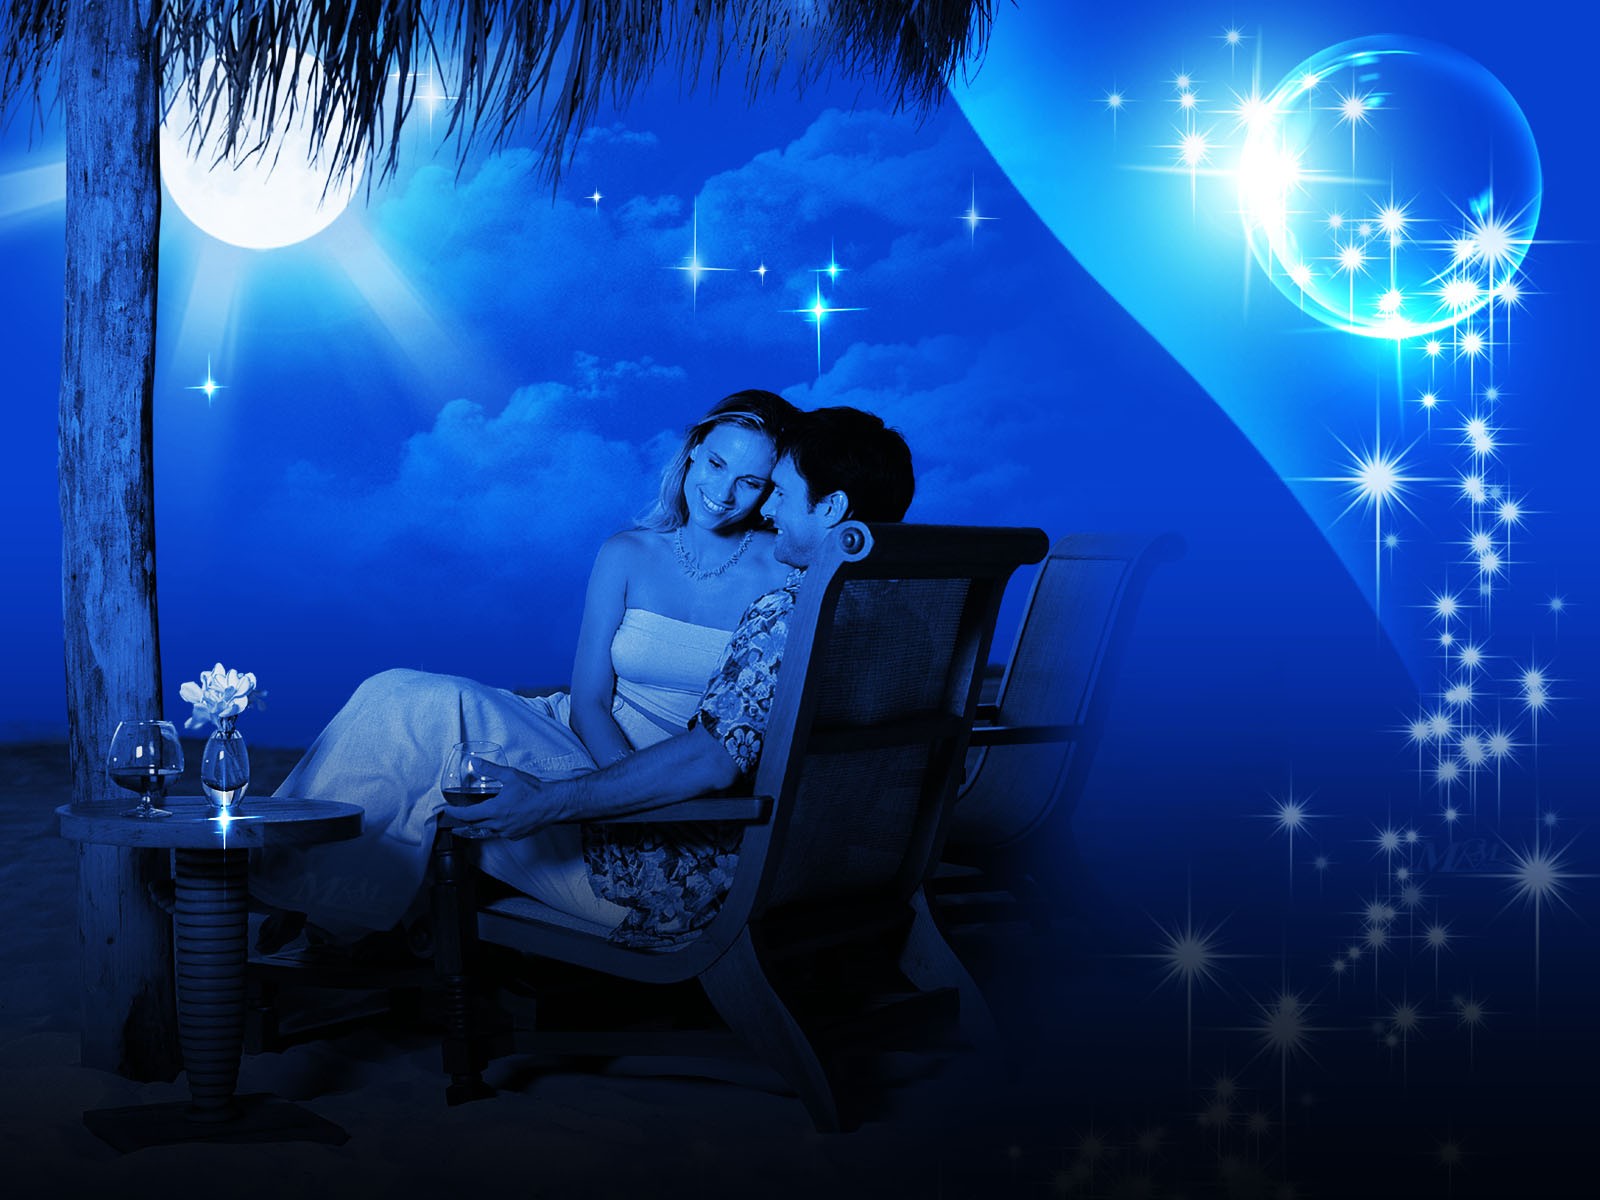 love couple night images